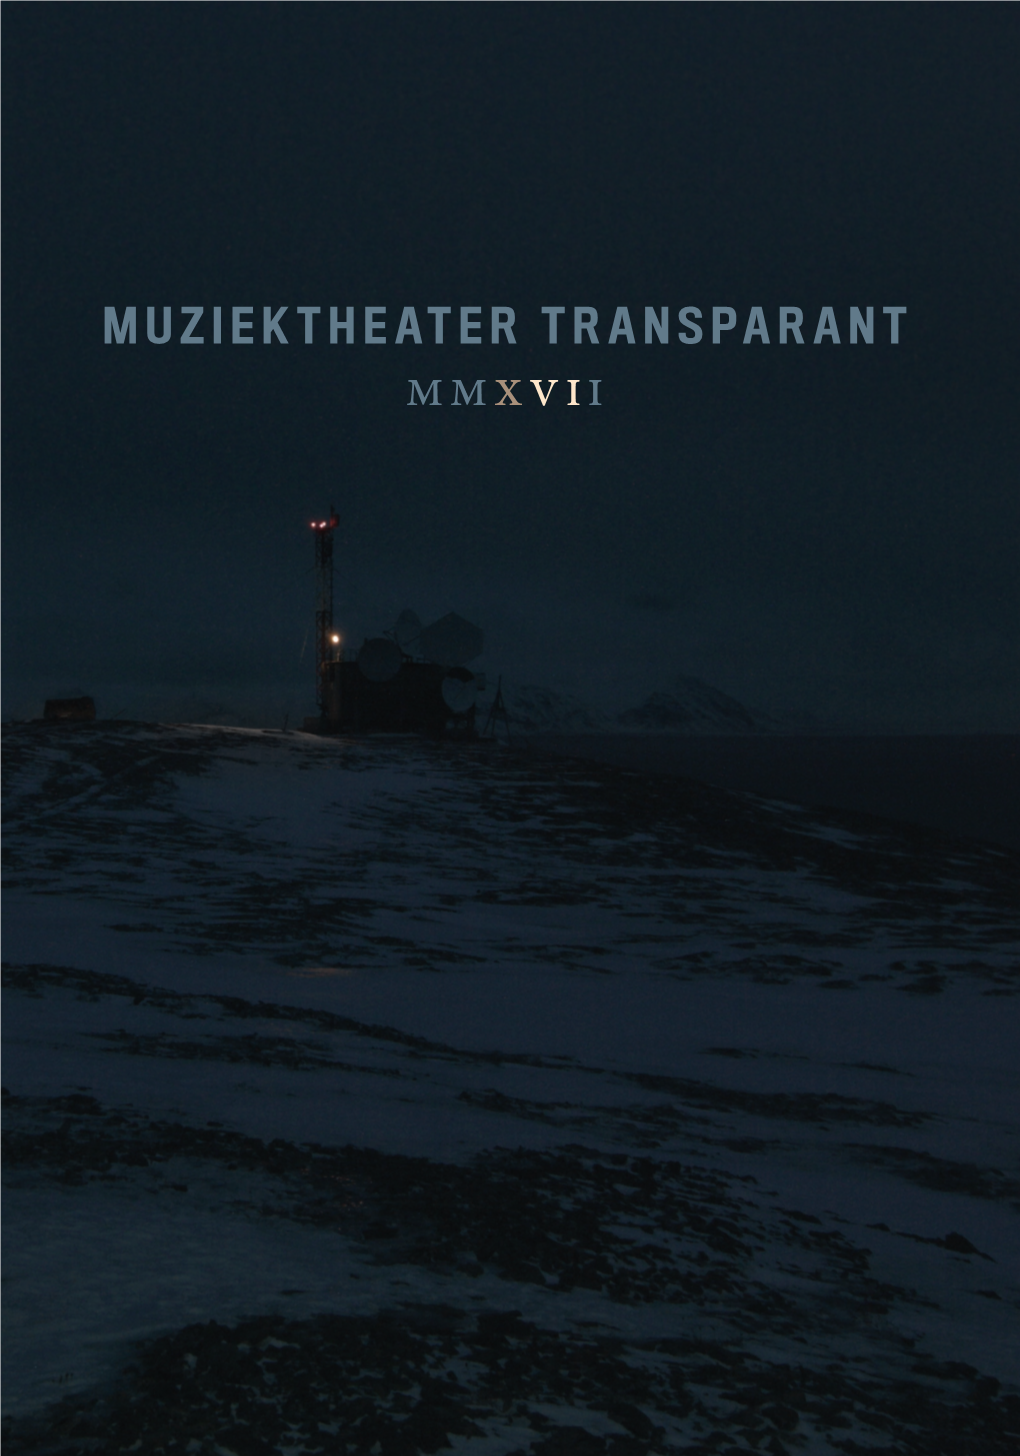 MMXVII RUHE the Diary of the One Who Disappeared Private View MUZIEKTHEATER TRANSPARANT LUIGI DE ANGELIS ЗМЕЯ